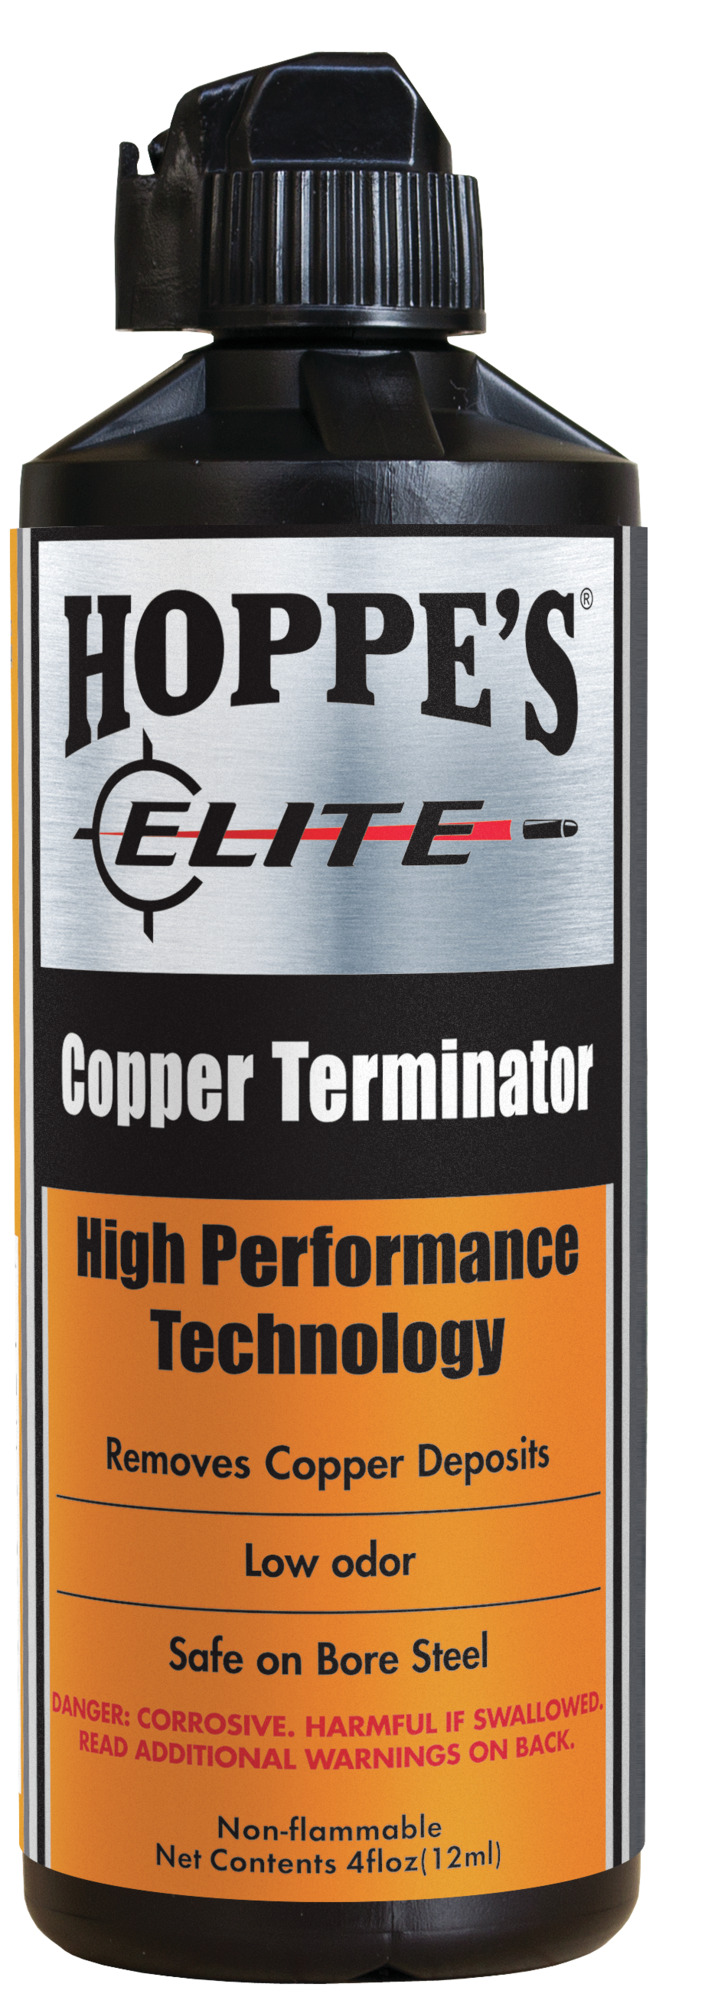 Buy Elite Copper Terminator and More | Hoppes